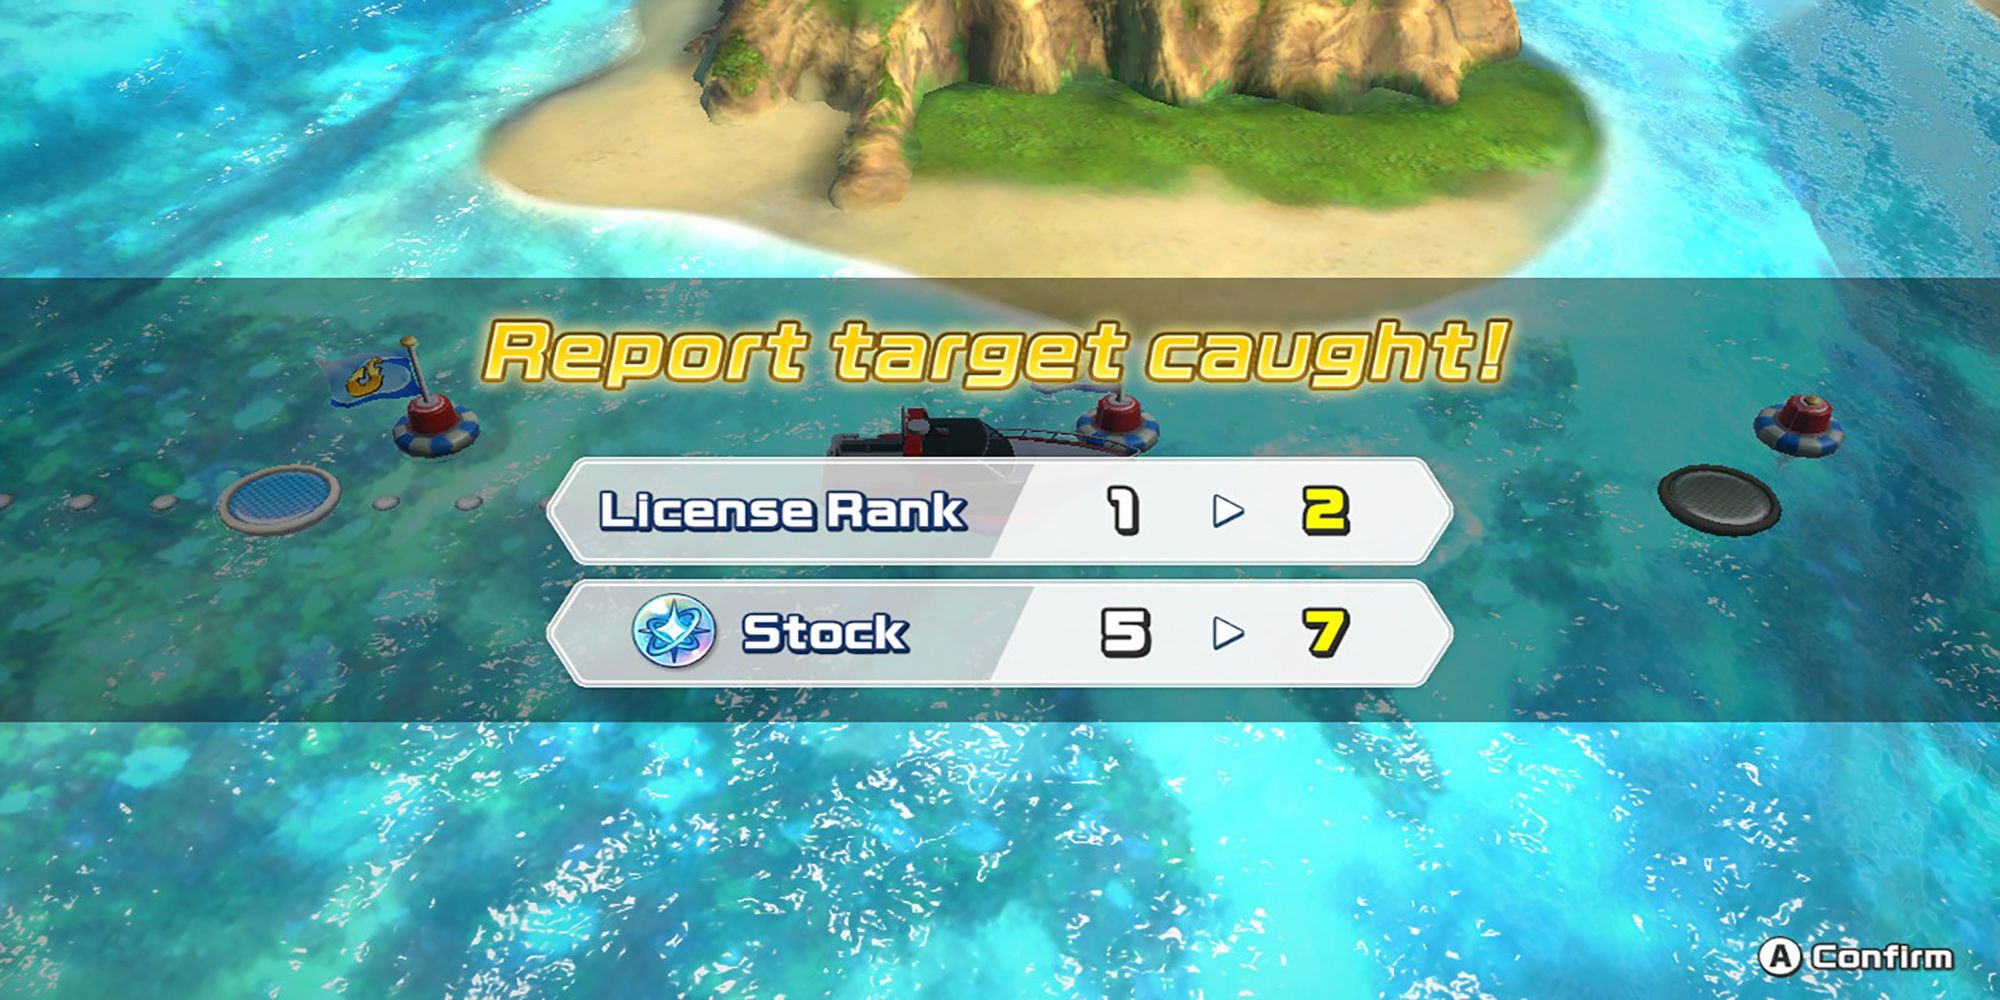 The player License Rank raises after a report target gets caught in Ace Angler: Fishing Spirits.